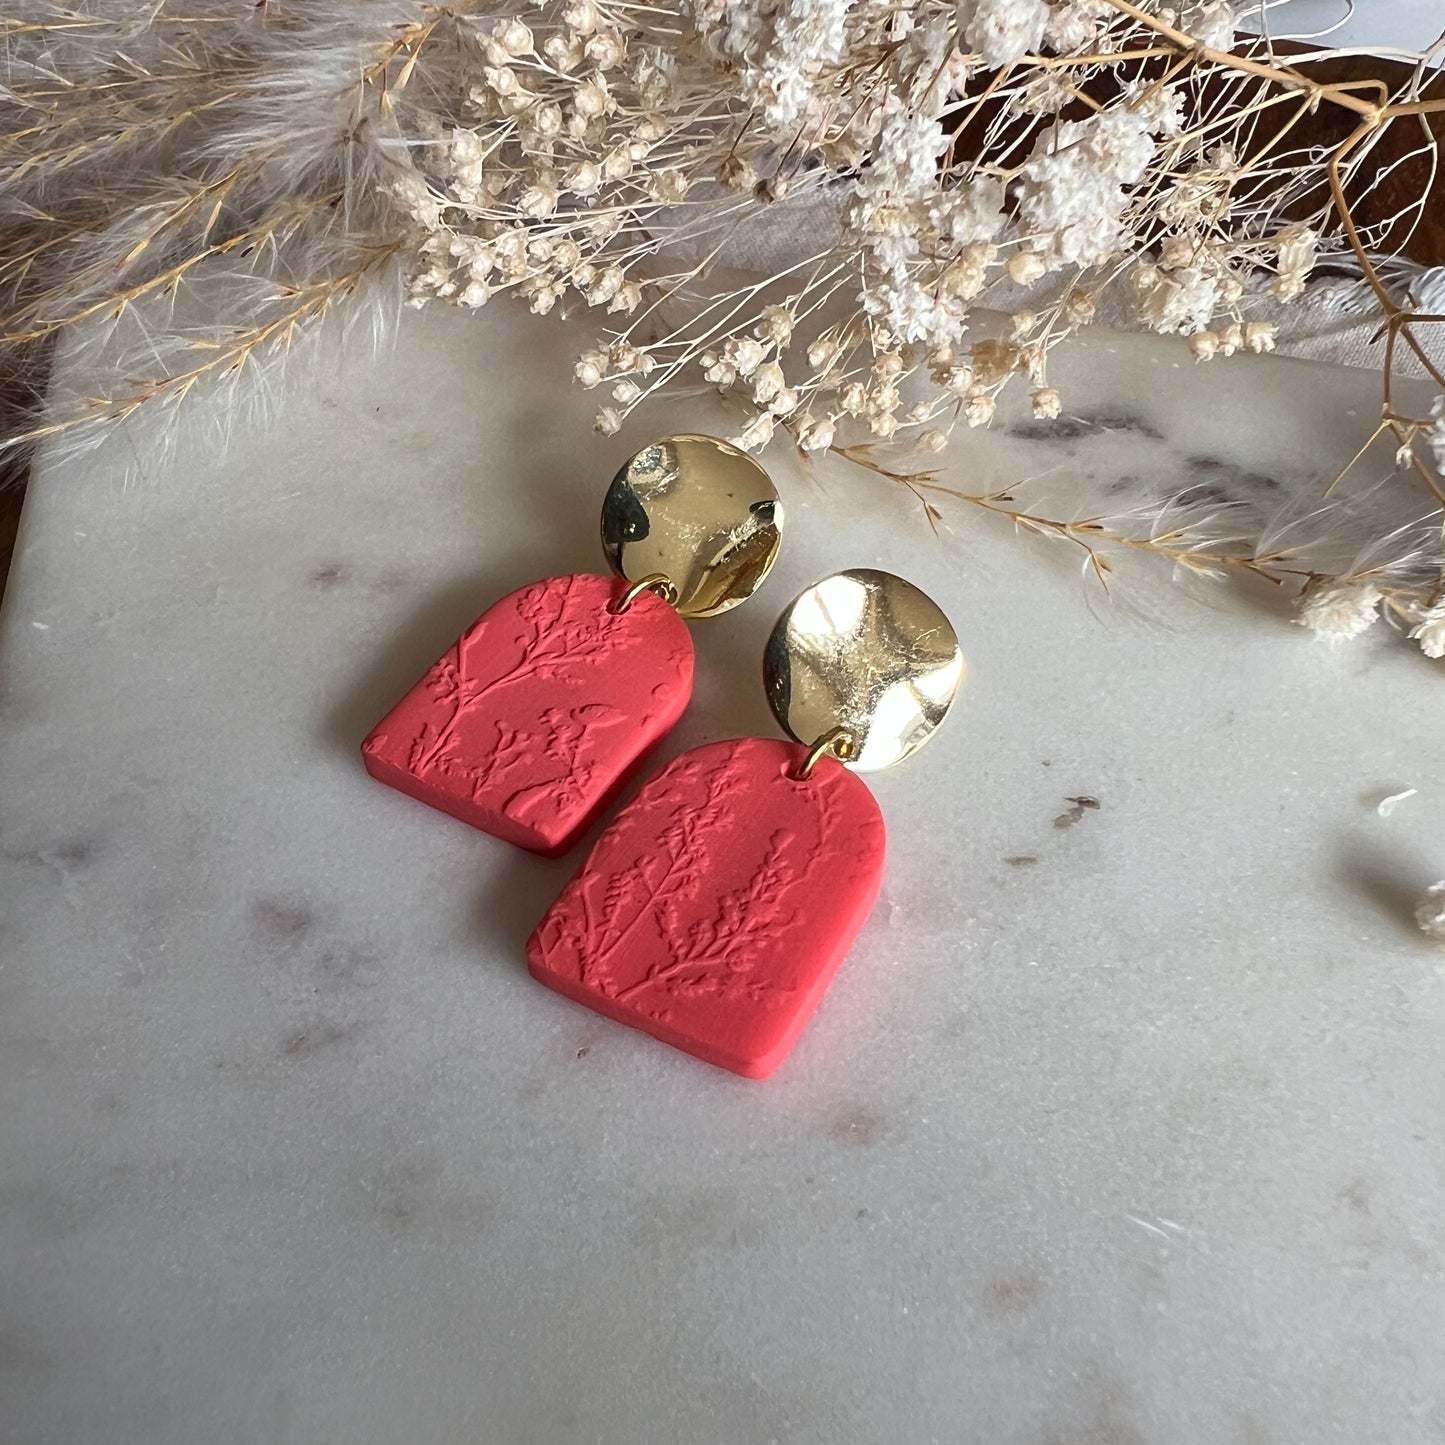 DARAS | statement circle stud drop earring with blossom textured rounded arch in bright coral red